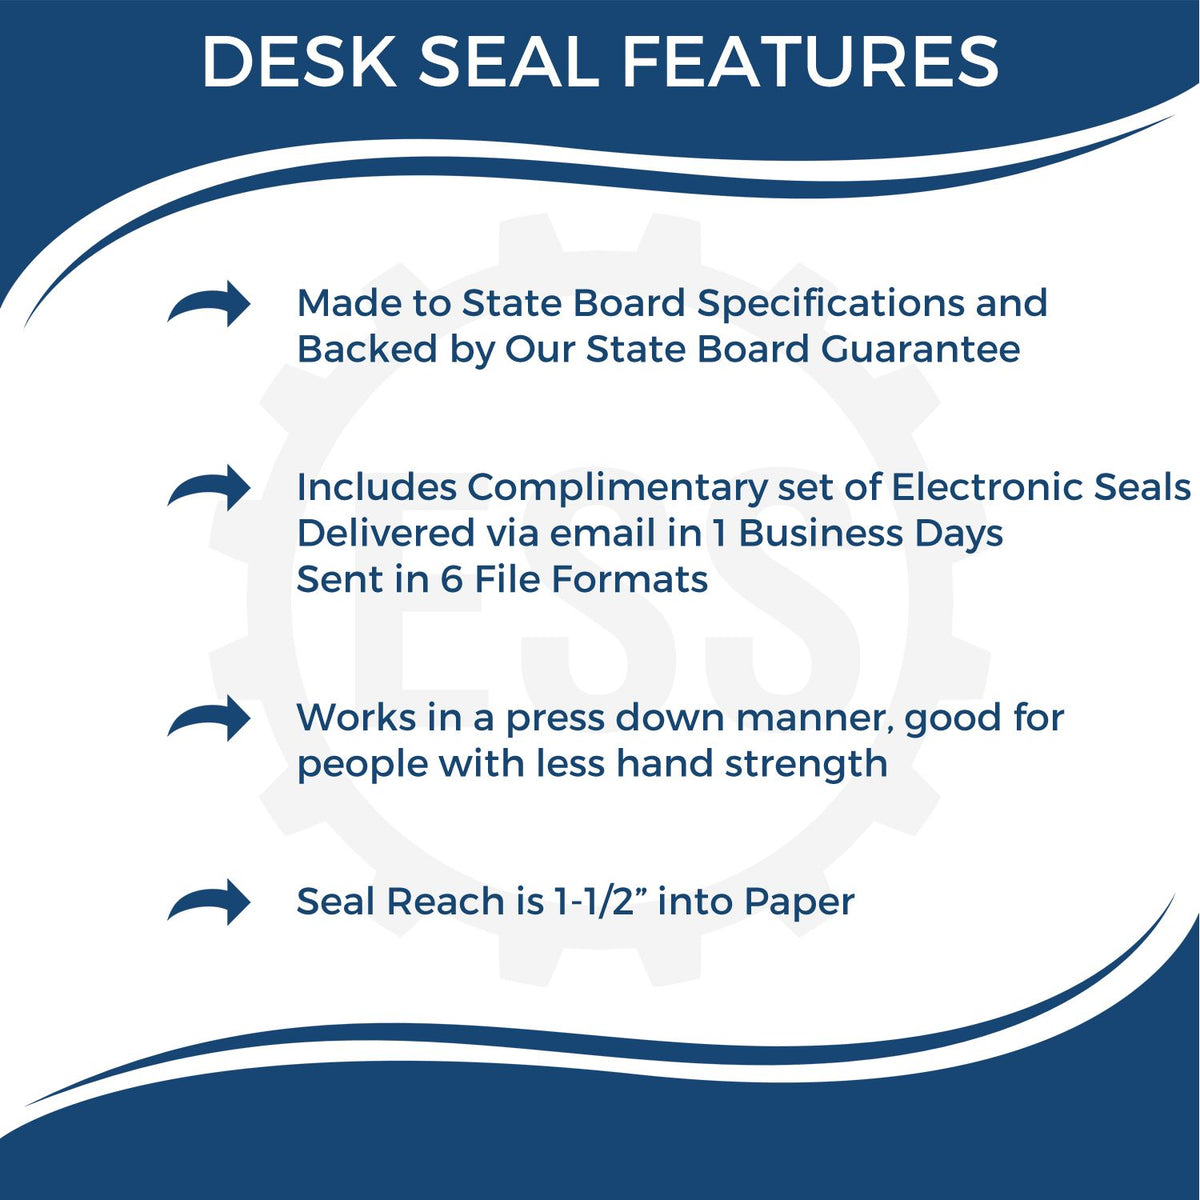 A picture of an infographic highlighting the selling points for the Alaska Desk Architect Embossing Seal